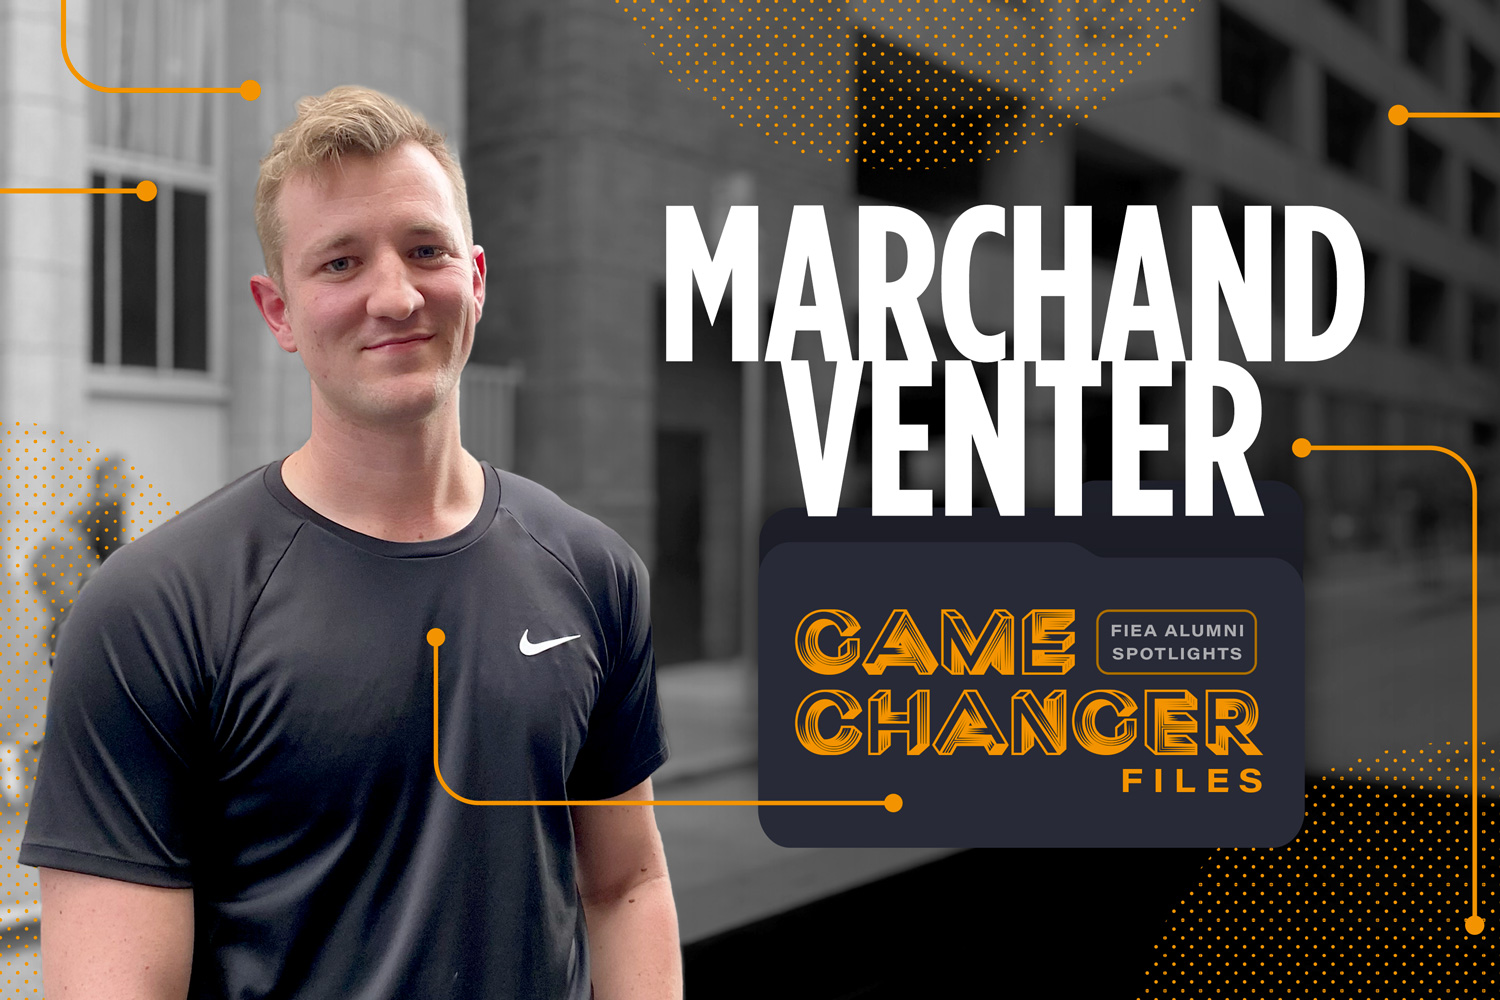 Marchand Venter, a tall man with short blond hair, smiled facing the camera as he stood in between the concrete buildings of a San Francisco street just a block away from the Moscone Center where the Game Developers Conference was held in March.